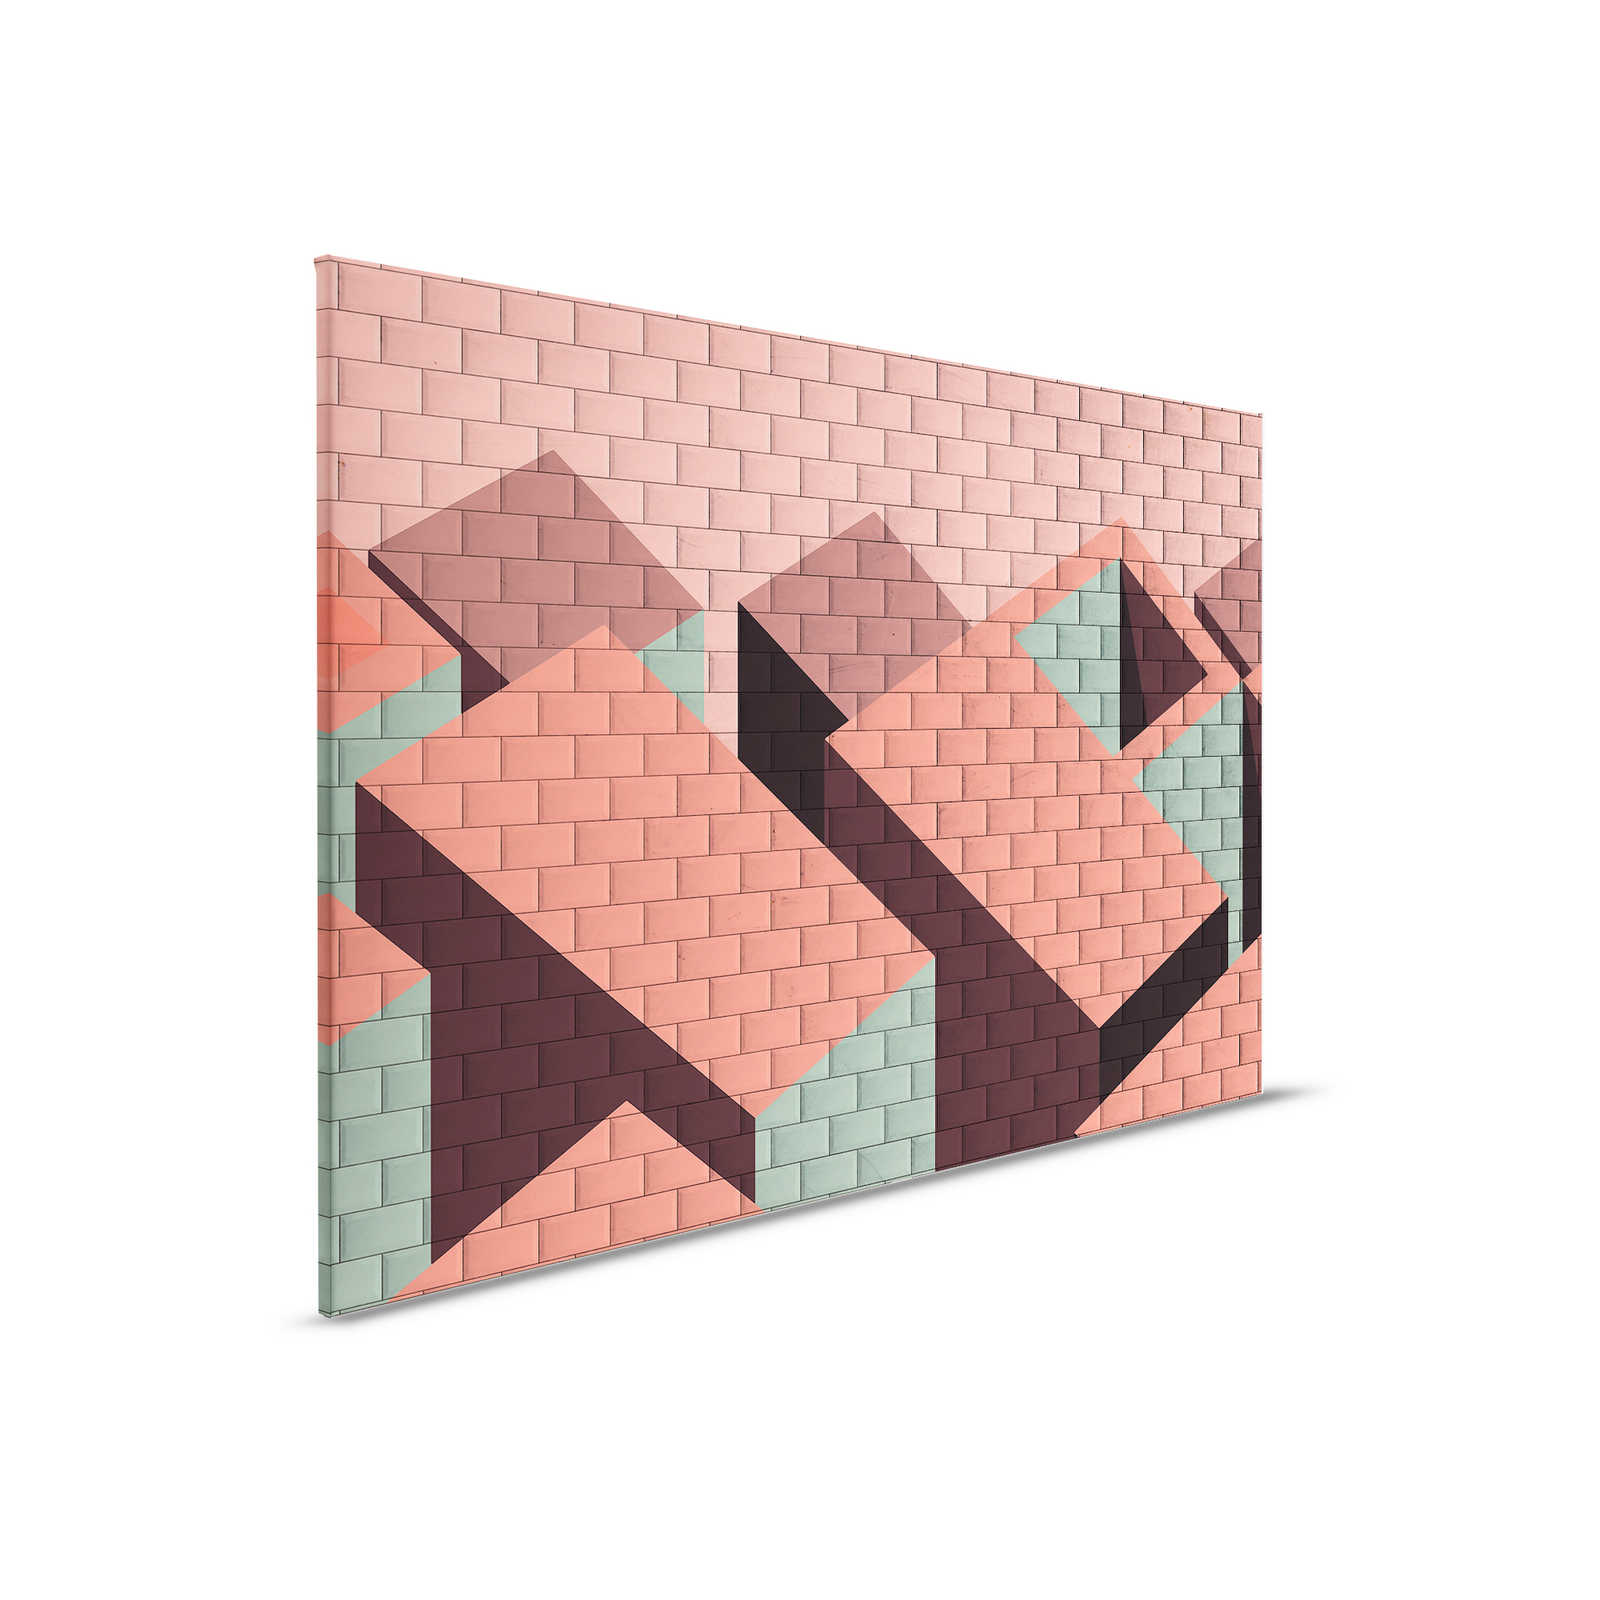         Canvas painting Brick Wall with Block Painting | red, pink, green - 0,90 m x 0,60 m
    